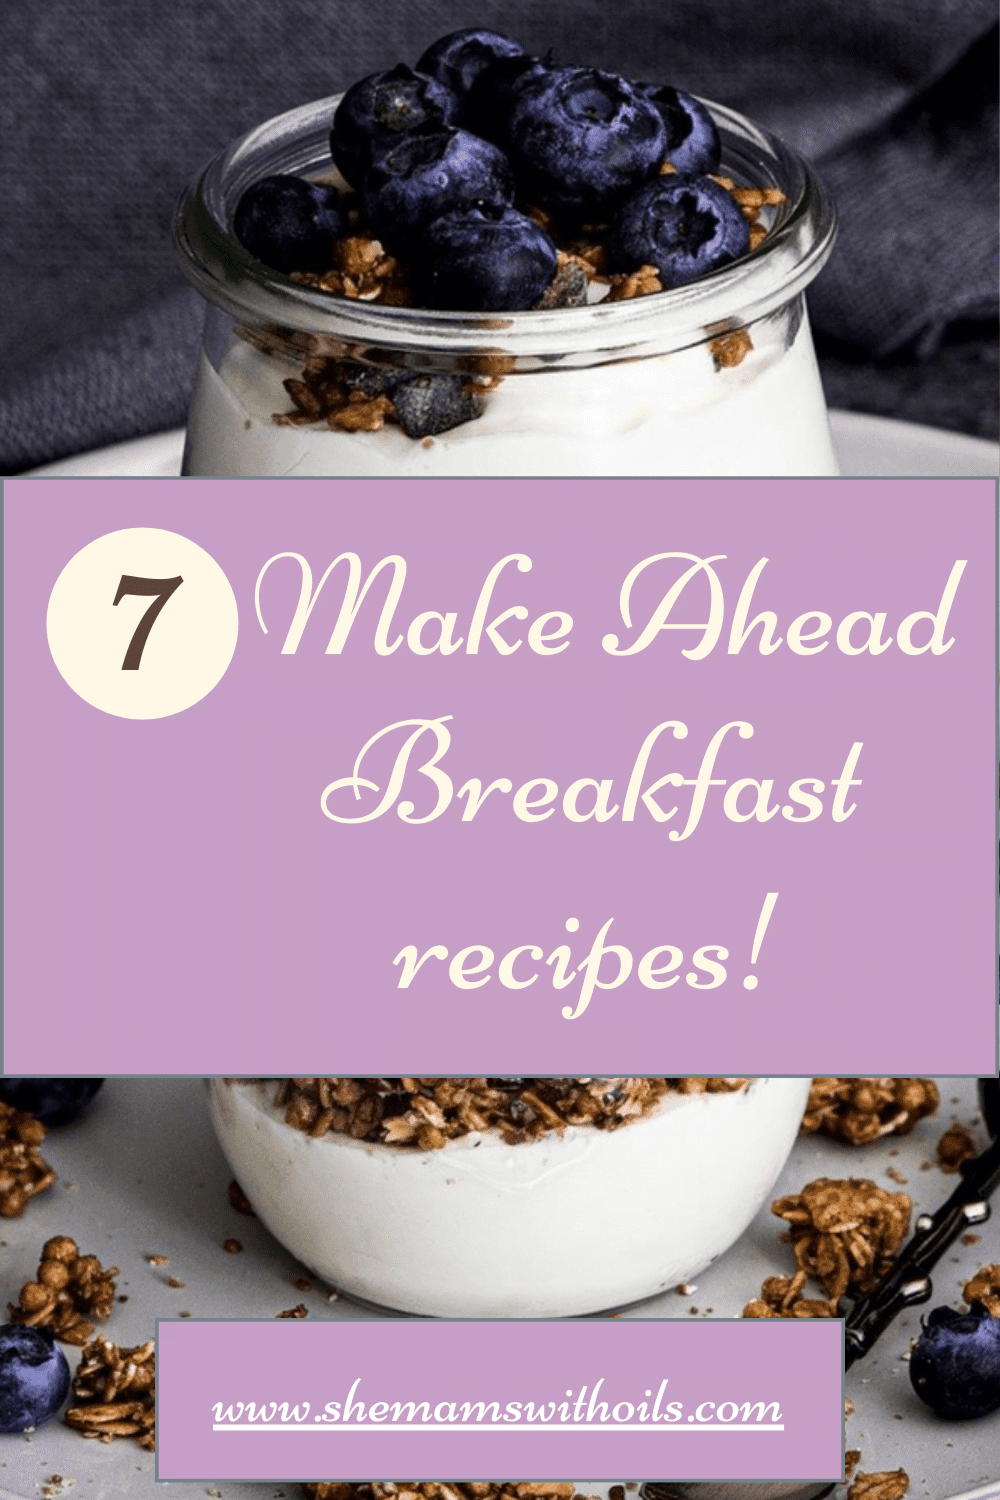 7 make ahead breakfast recipes that use rolled oats but are not porridge!